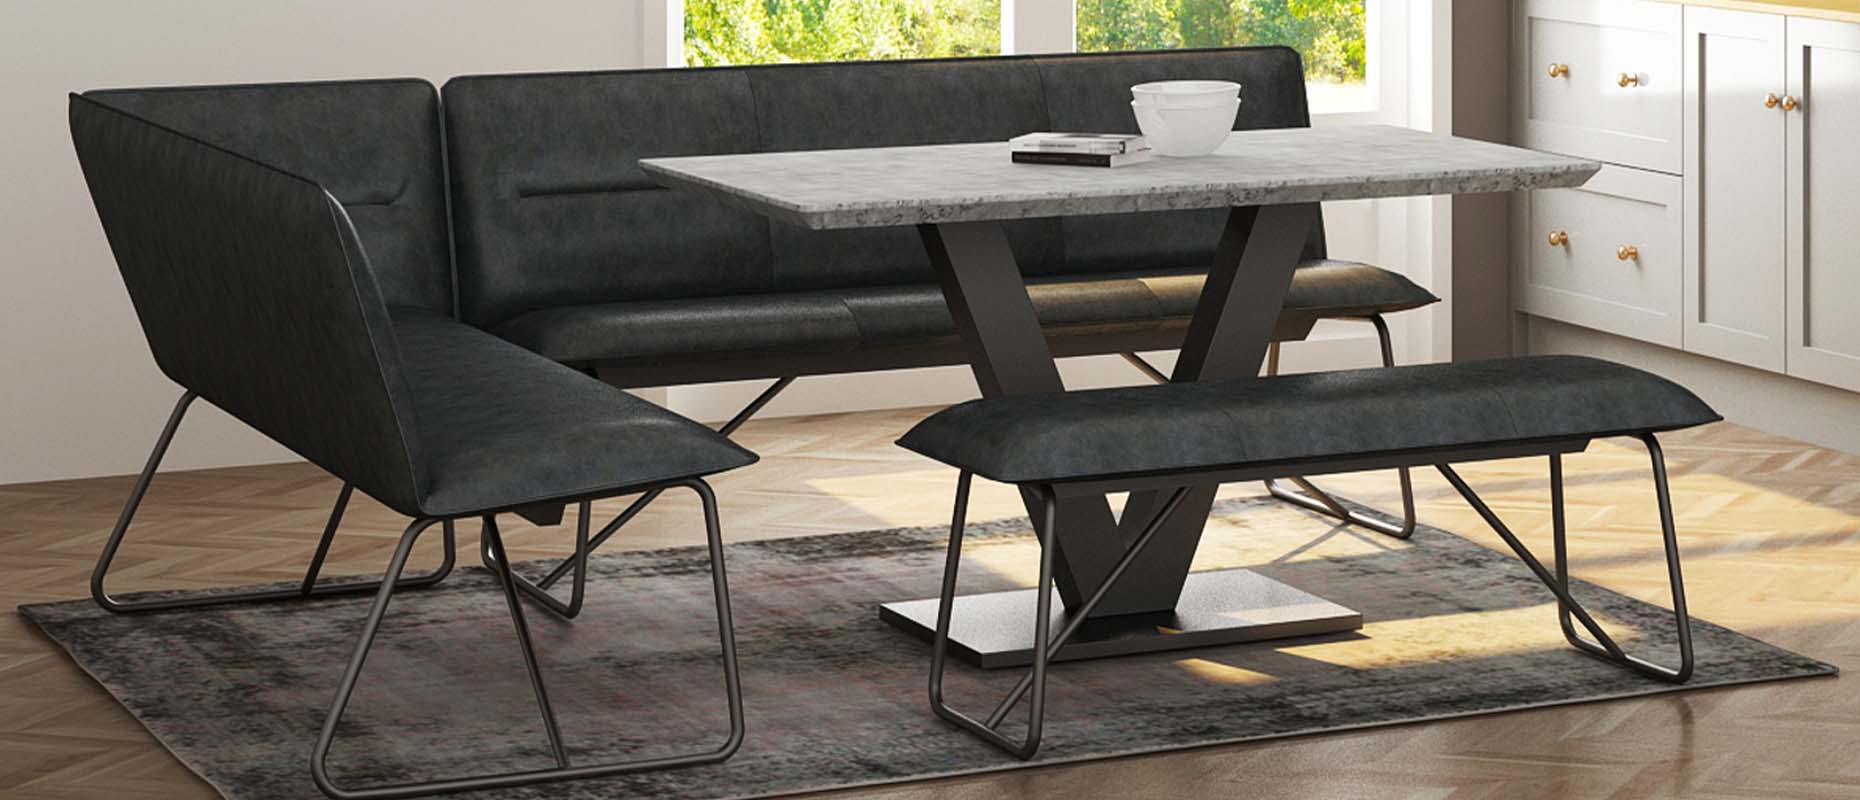 Floki dining collection at Forrest Furnishing